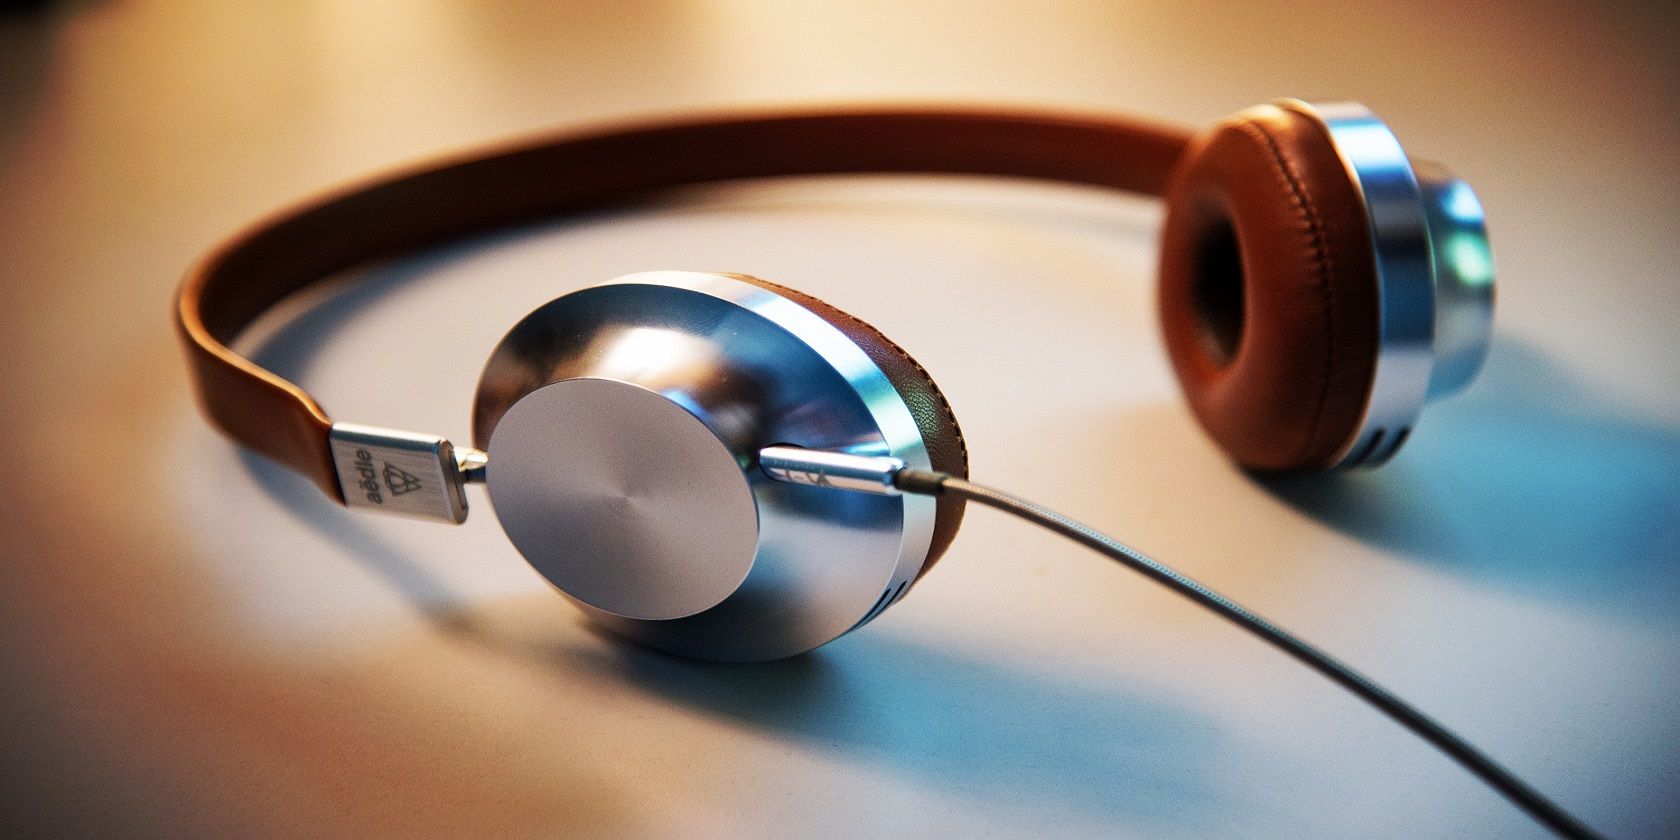 Headphones Laying on a Brown Background